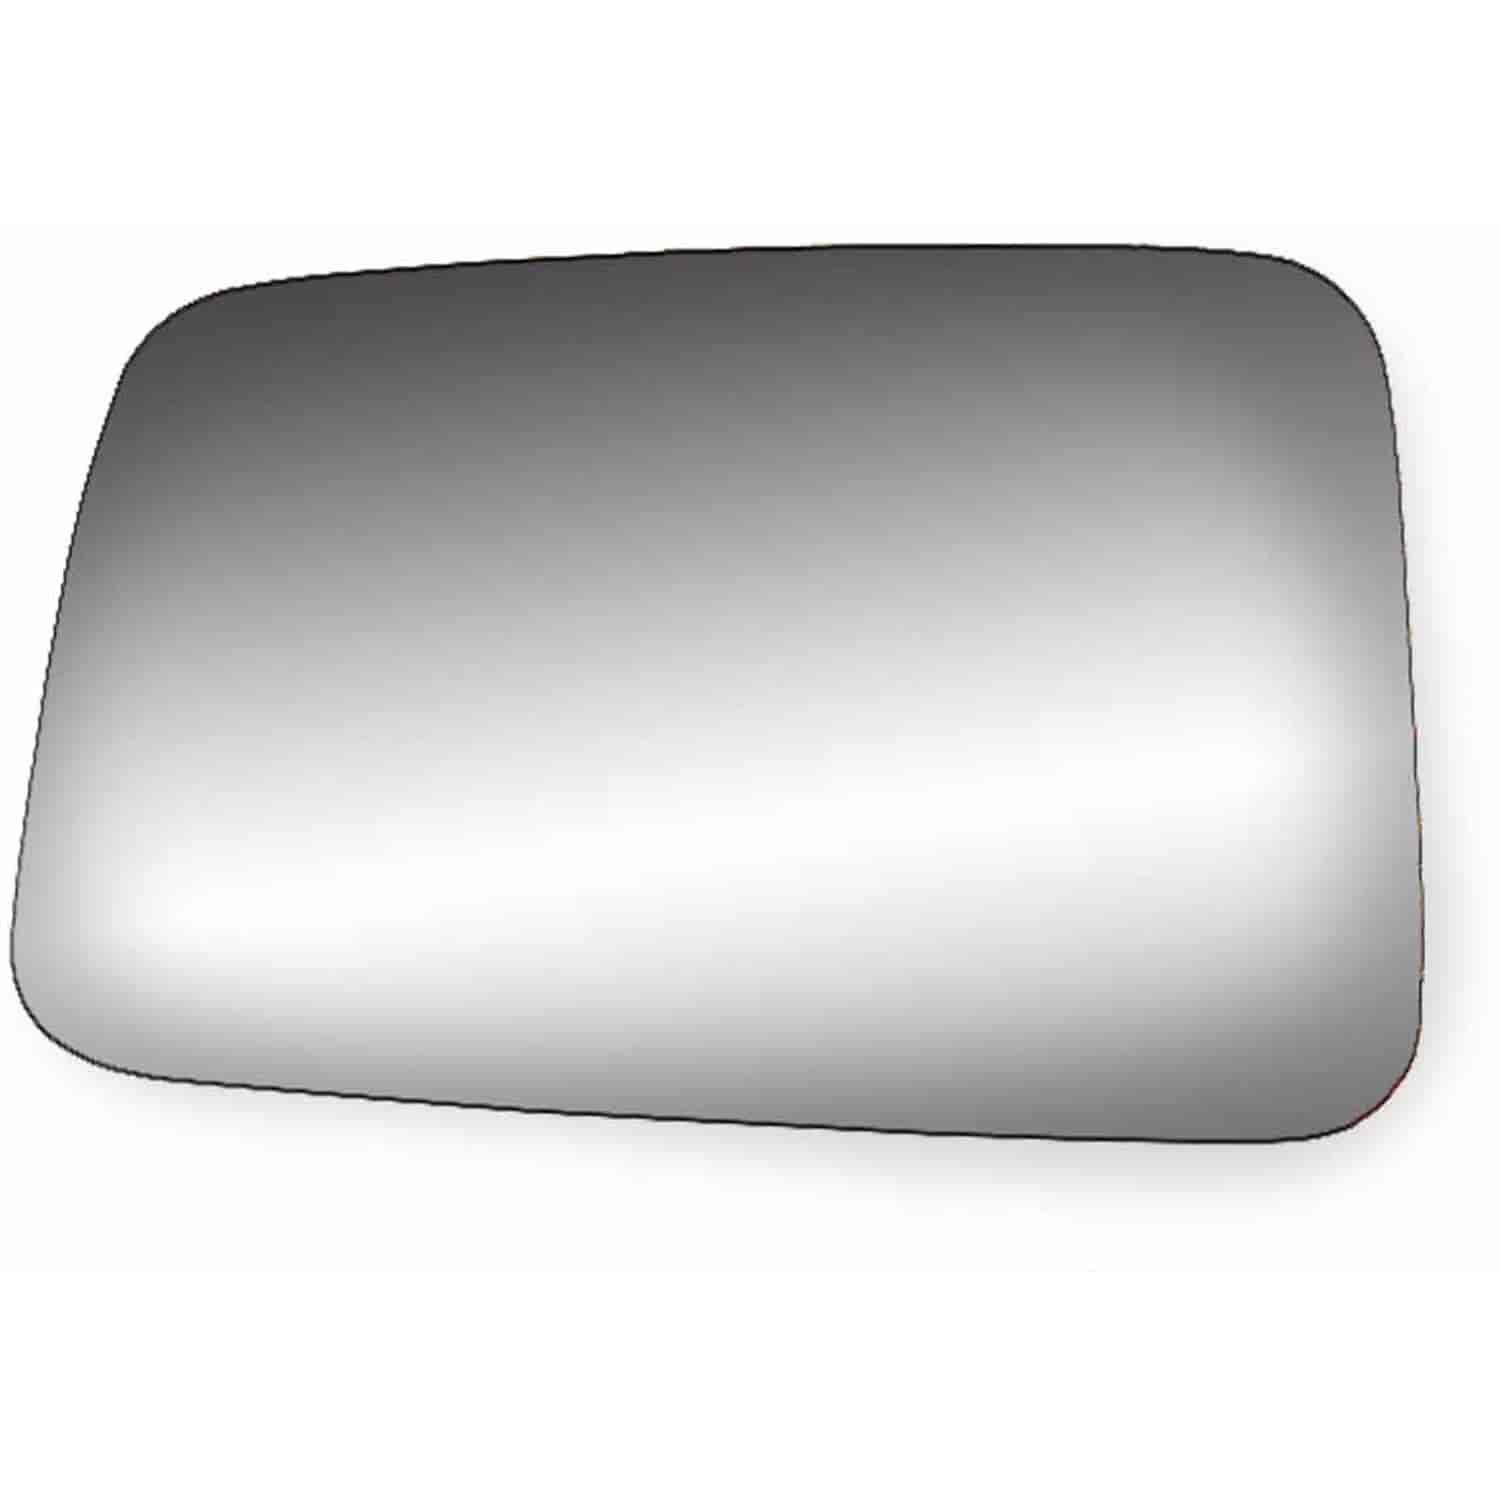 Replacement Glass for 07-11 Edge; 07-10 MKX the glass measures 4 15/16 tall by 7 13/16 wide and 8 3/